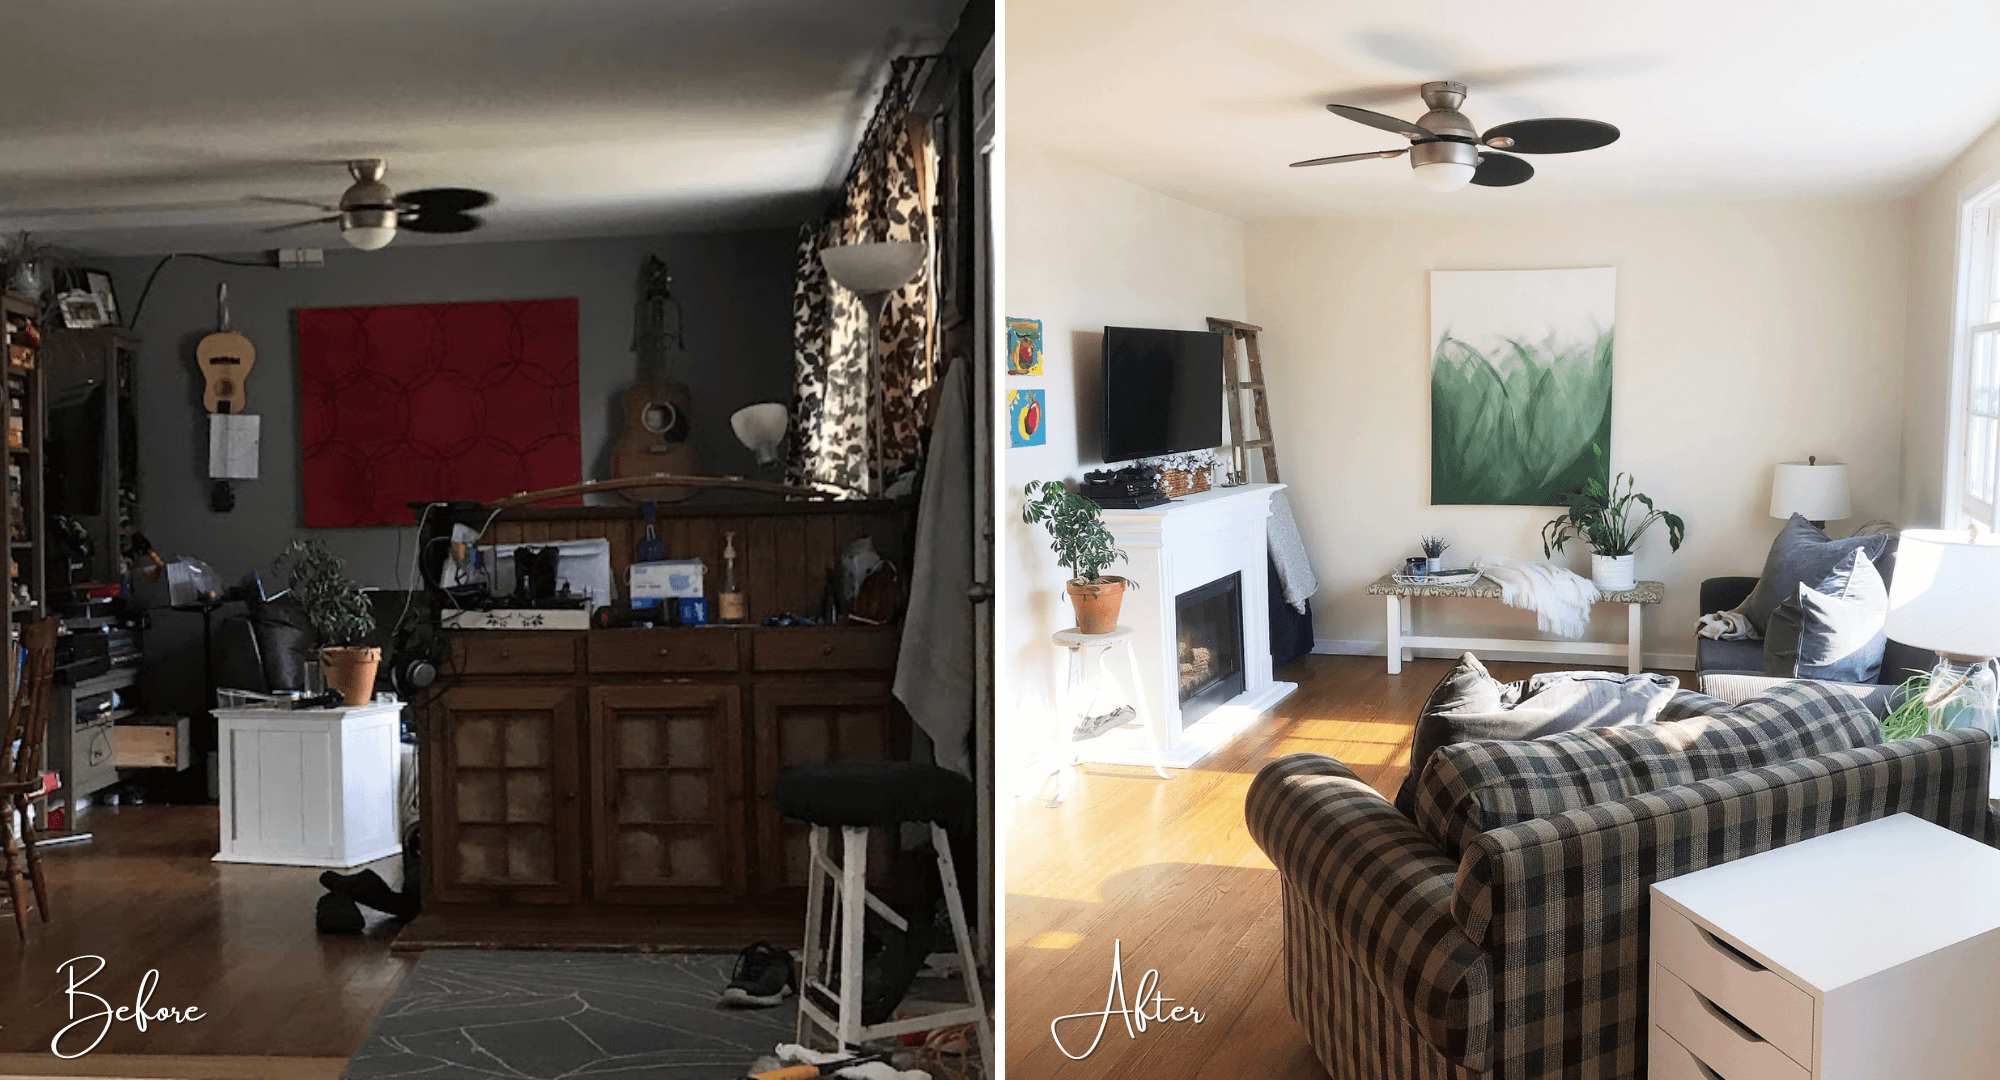 the before and after of the living room interior space